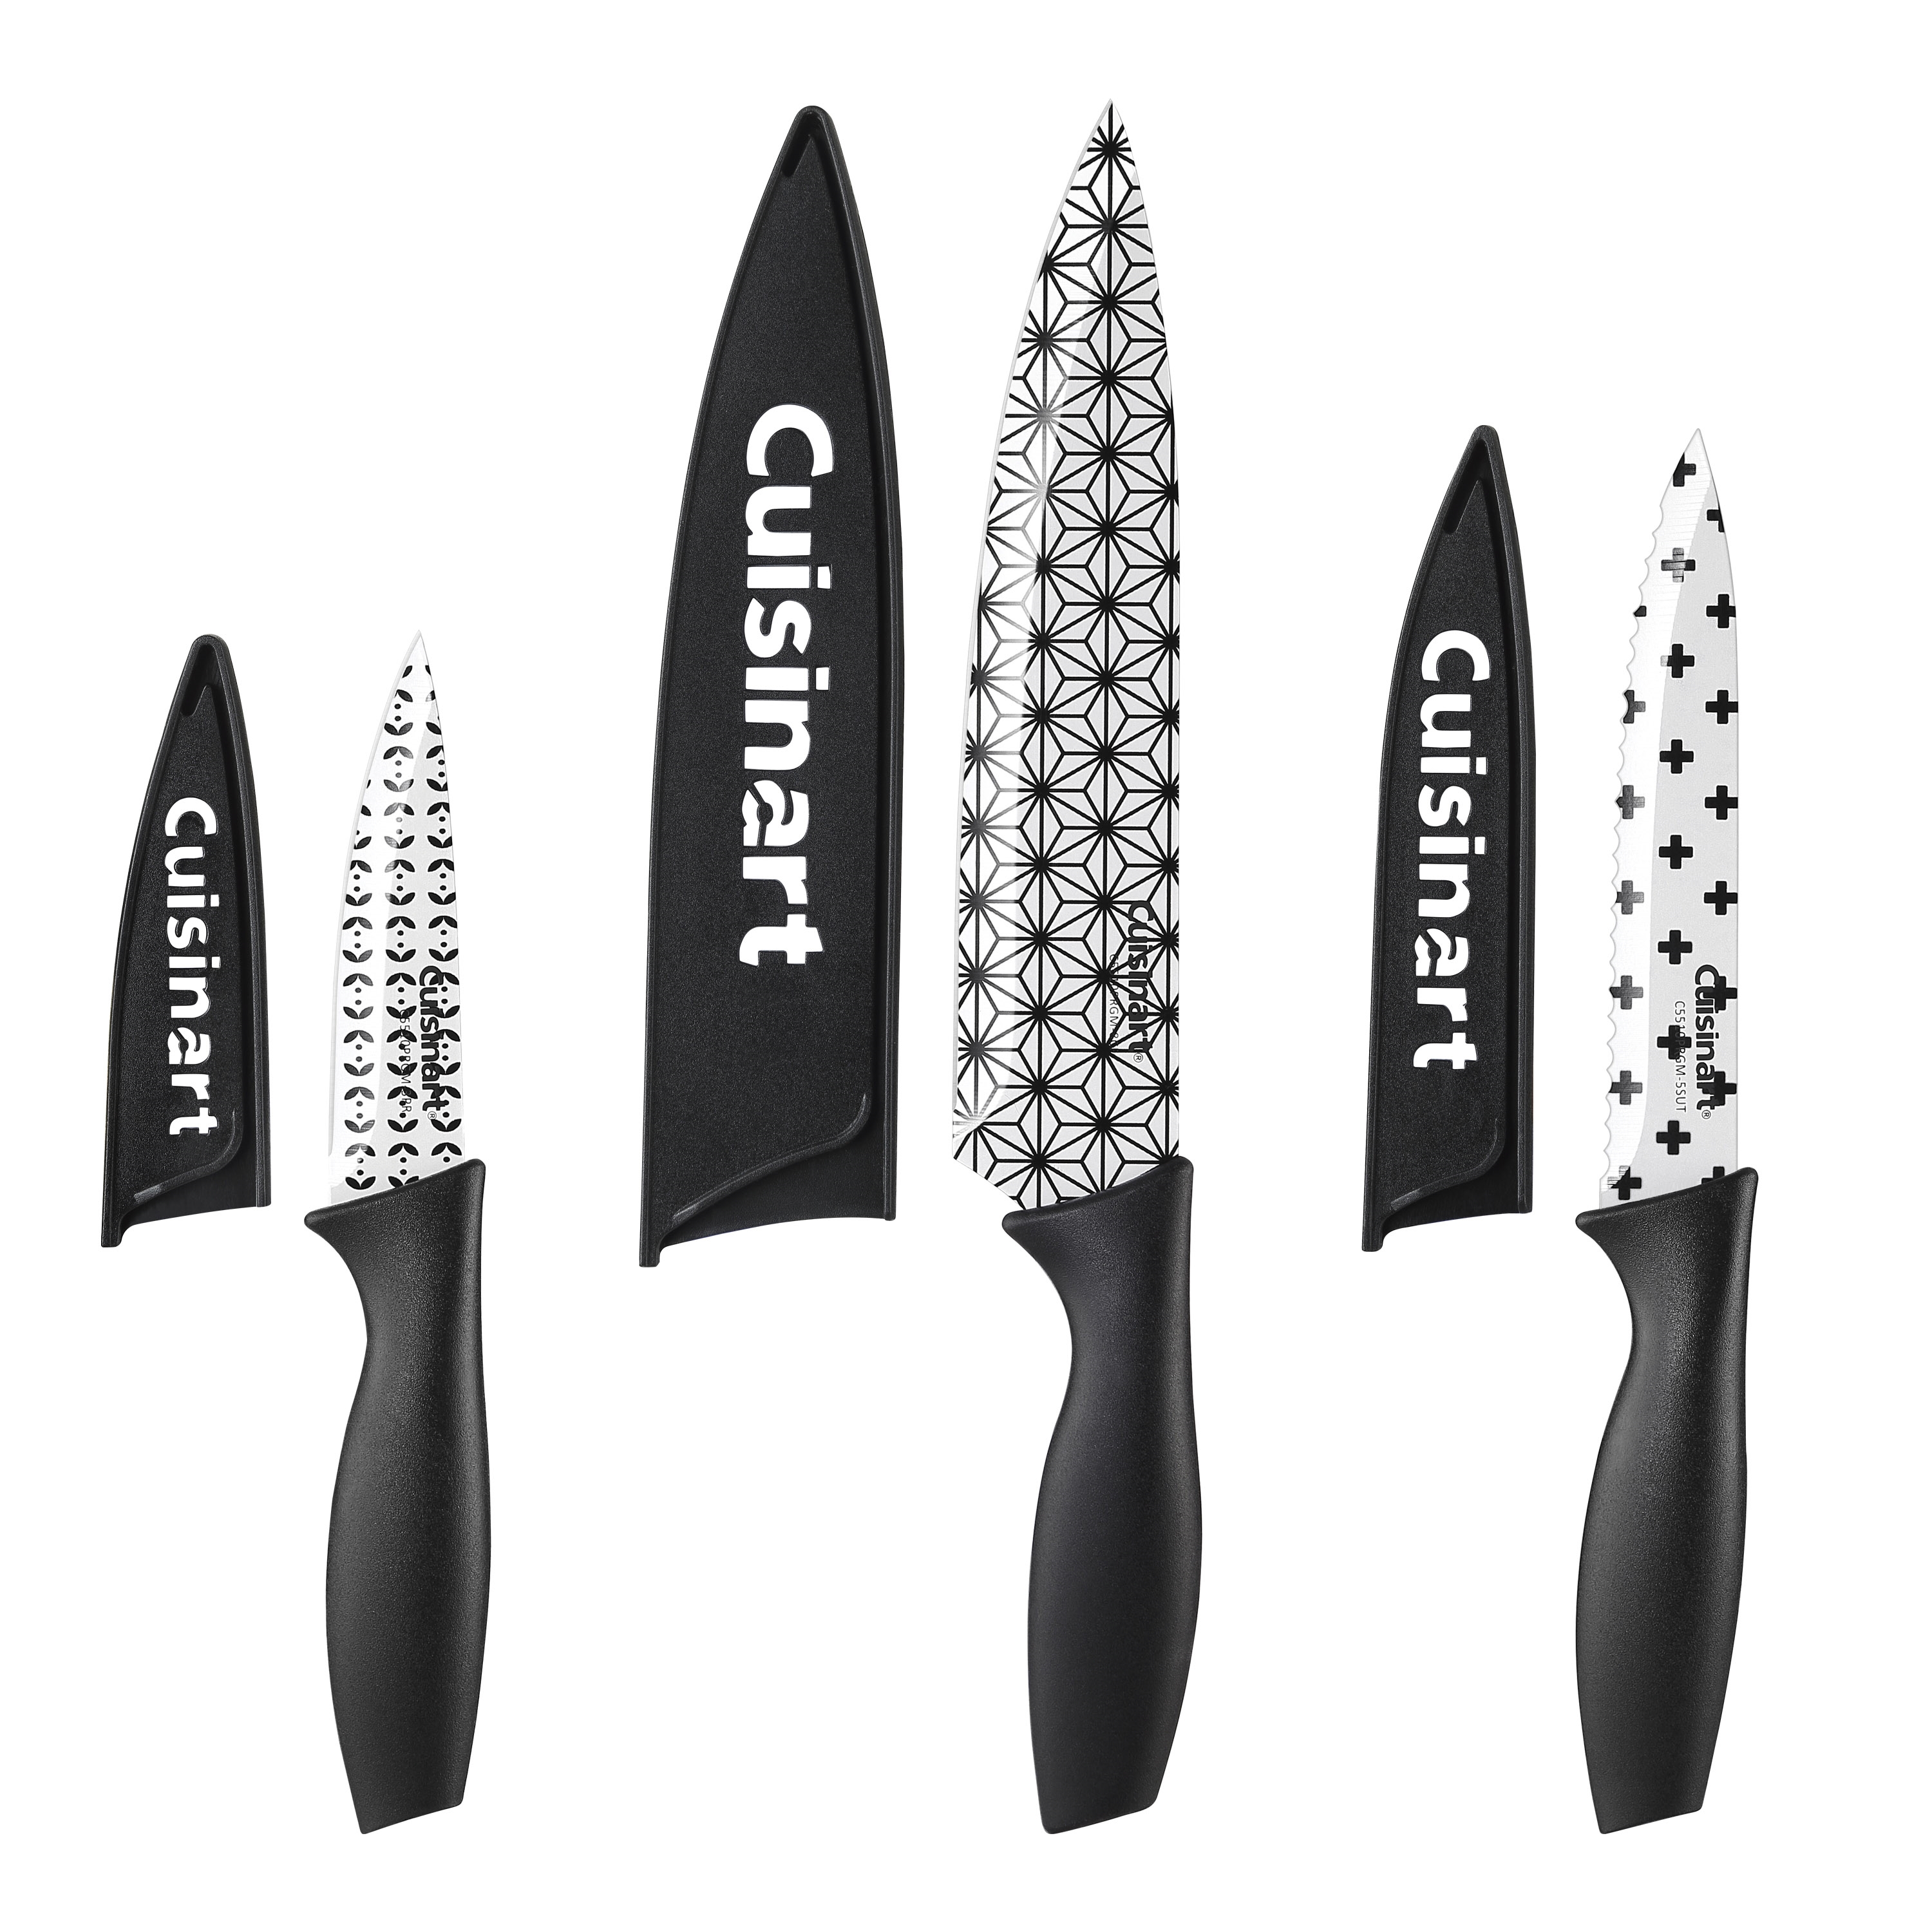 Cuisinart 12-Piece Ceramic Coated Color Knife Set with Blade Guards,  C55-12PCGW 